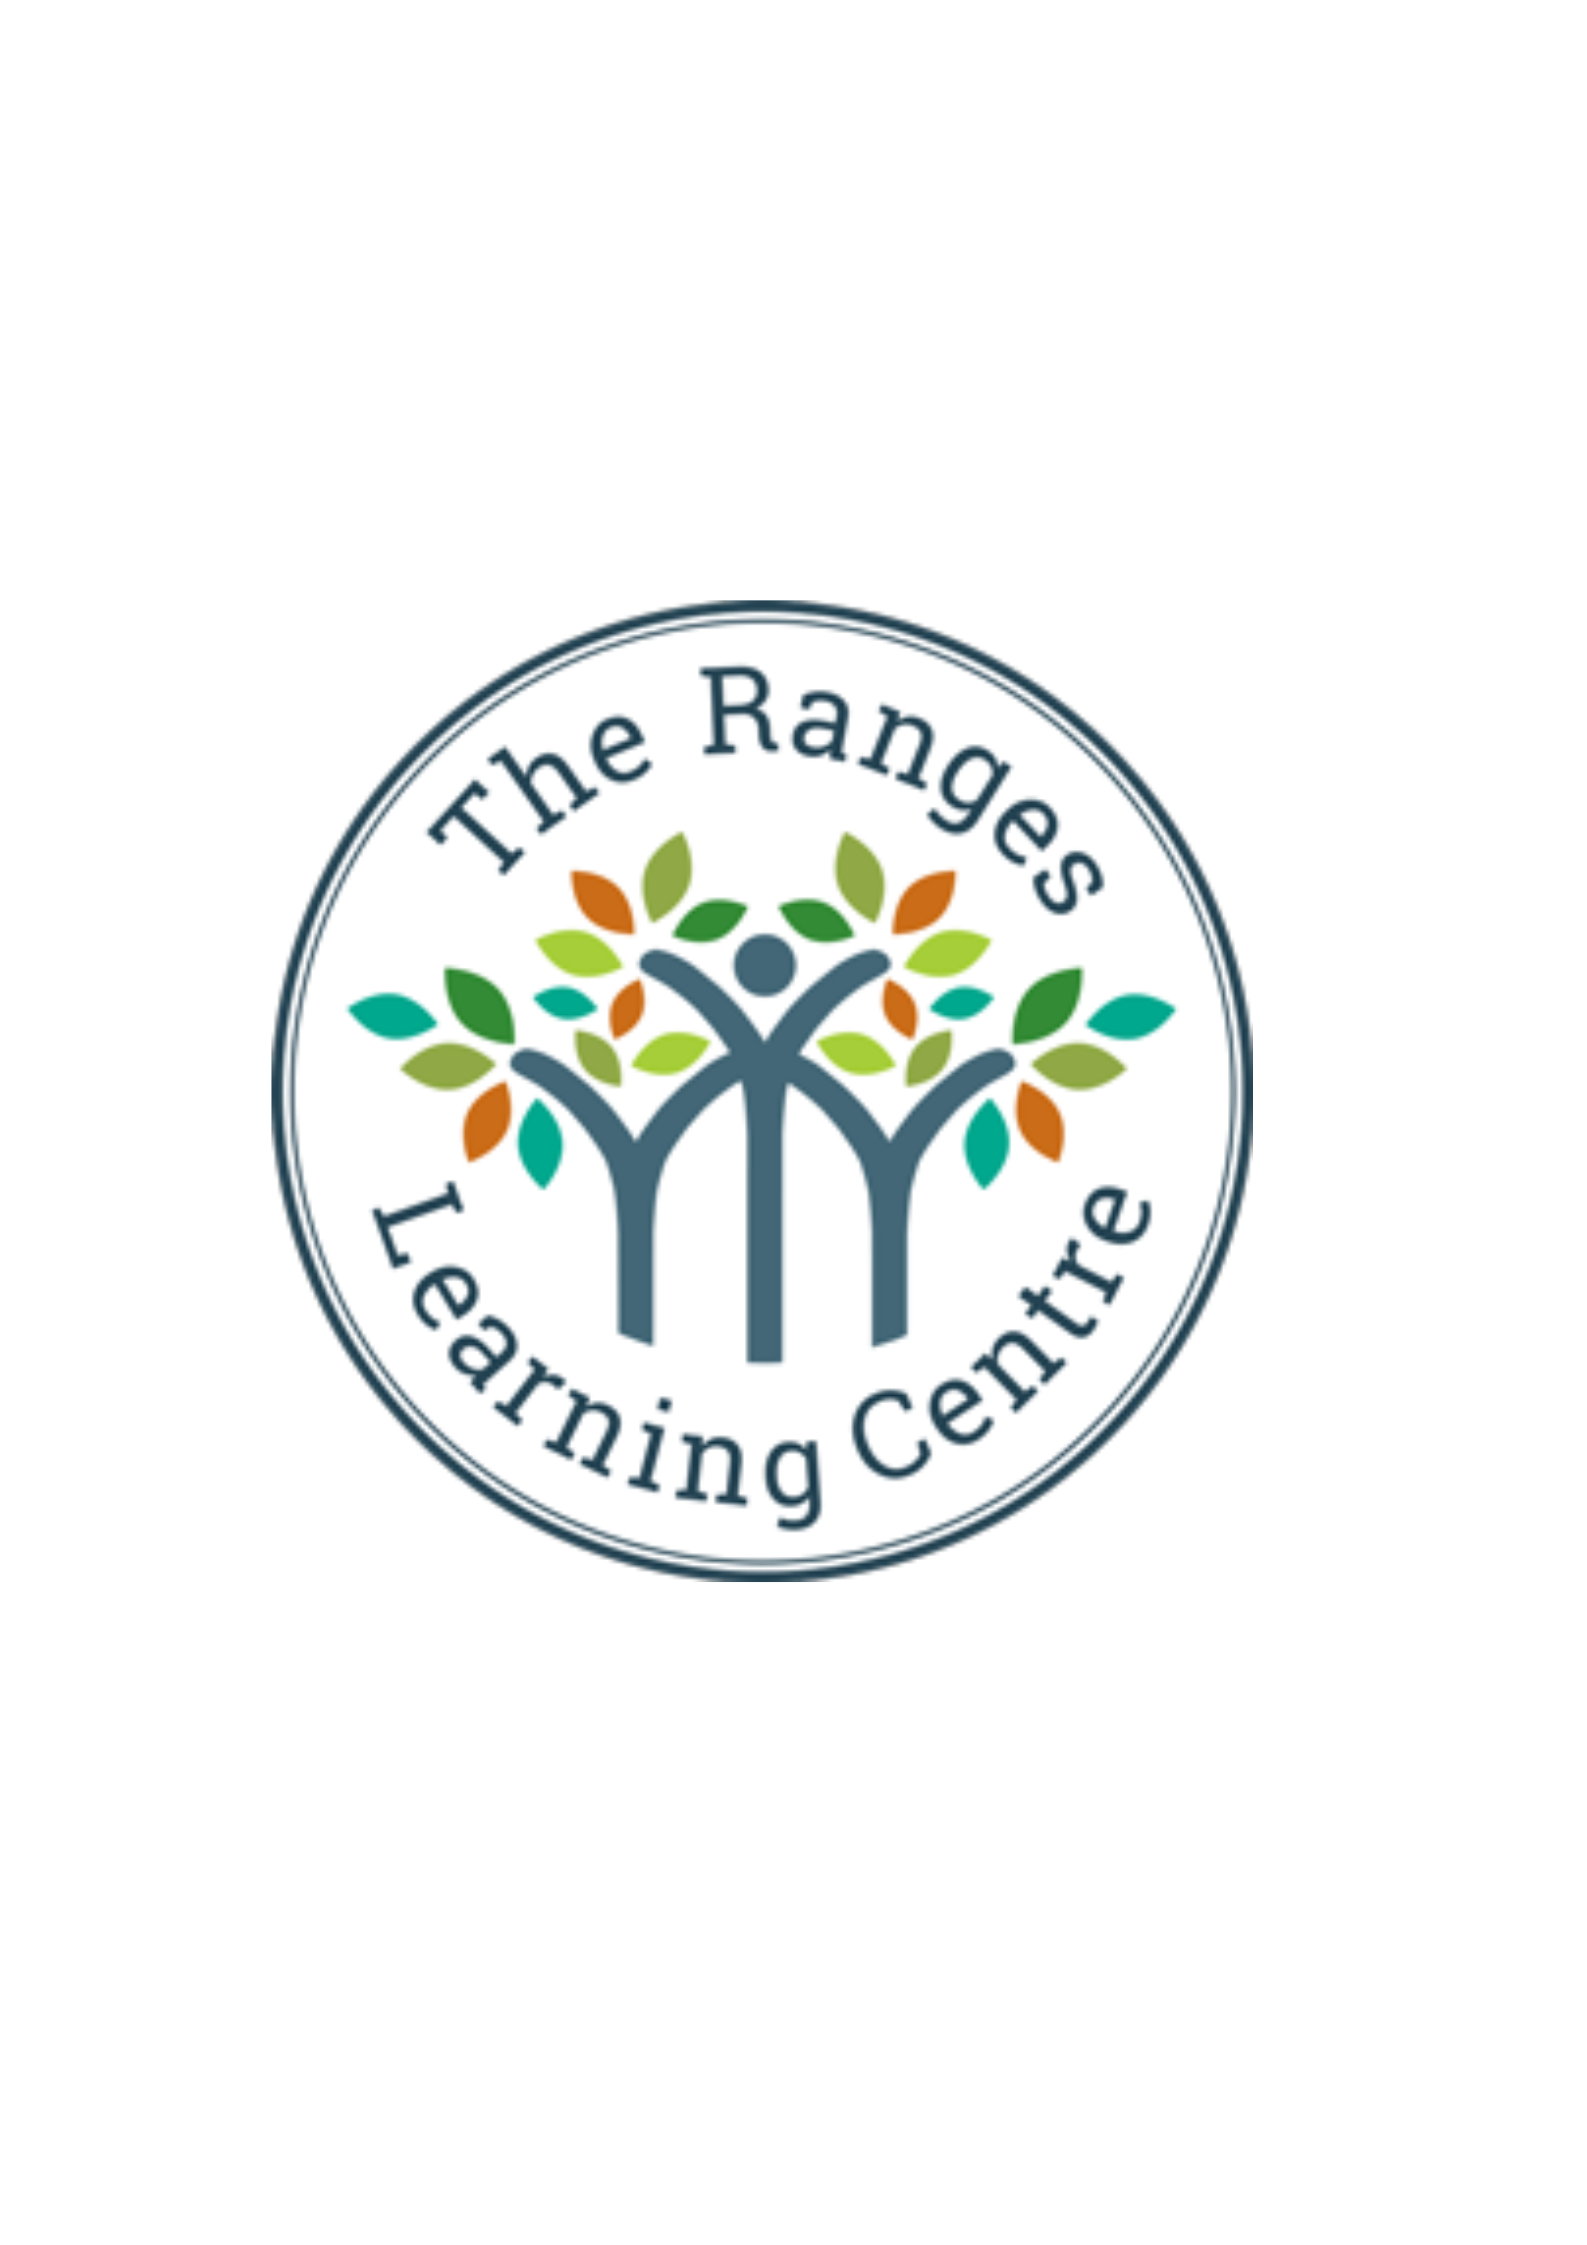 The Ranges Learning Centre